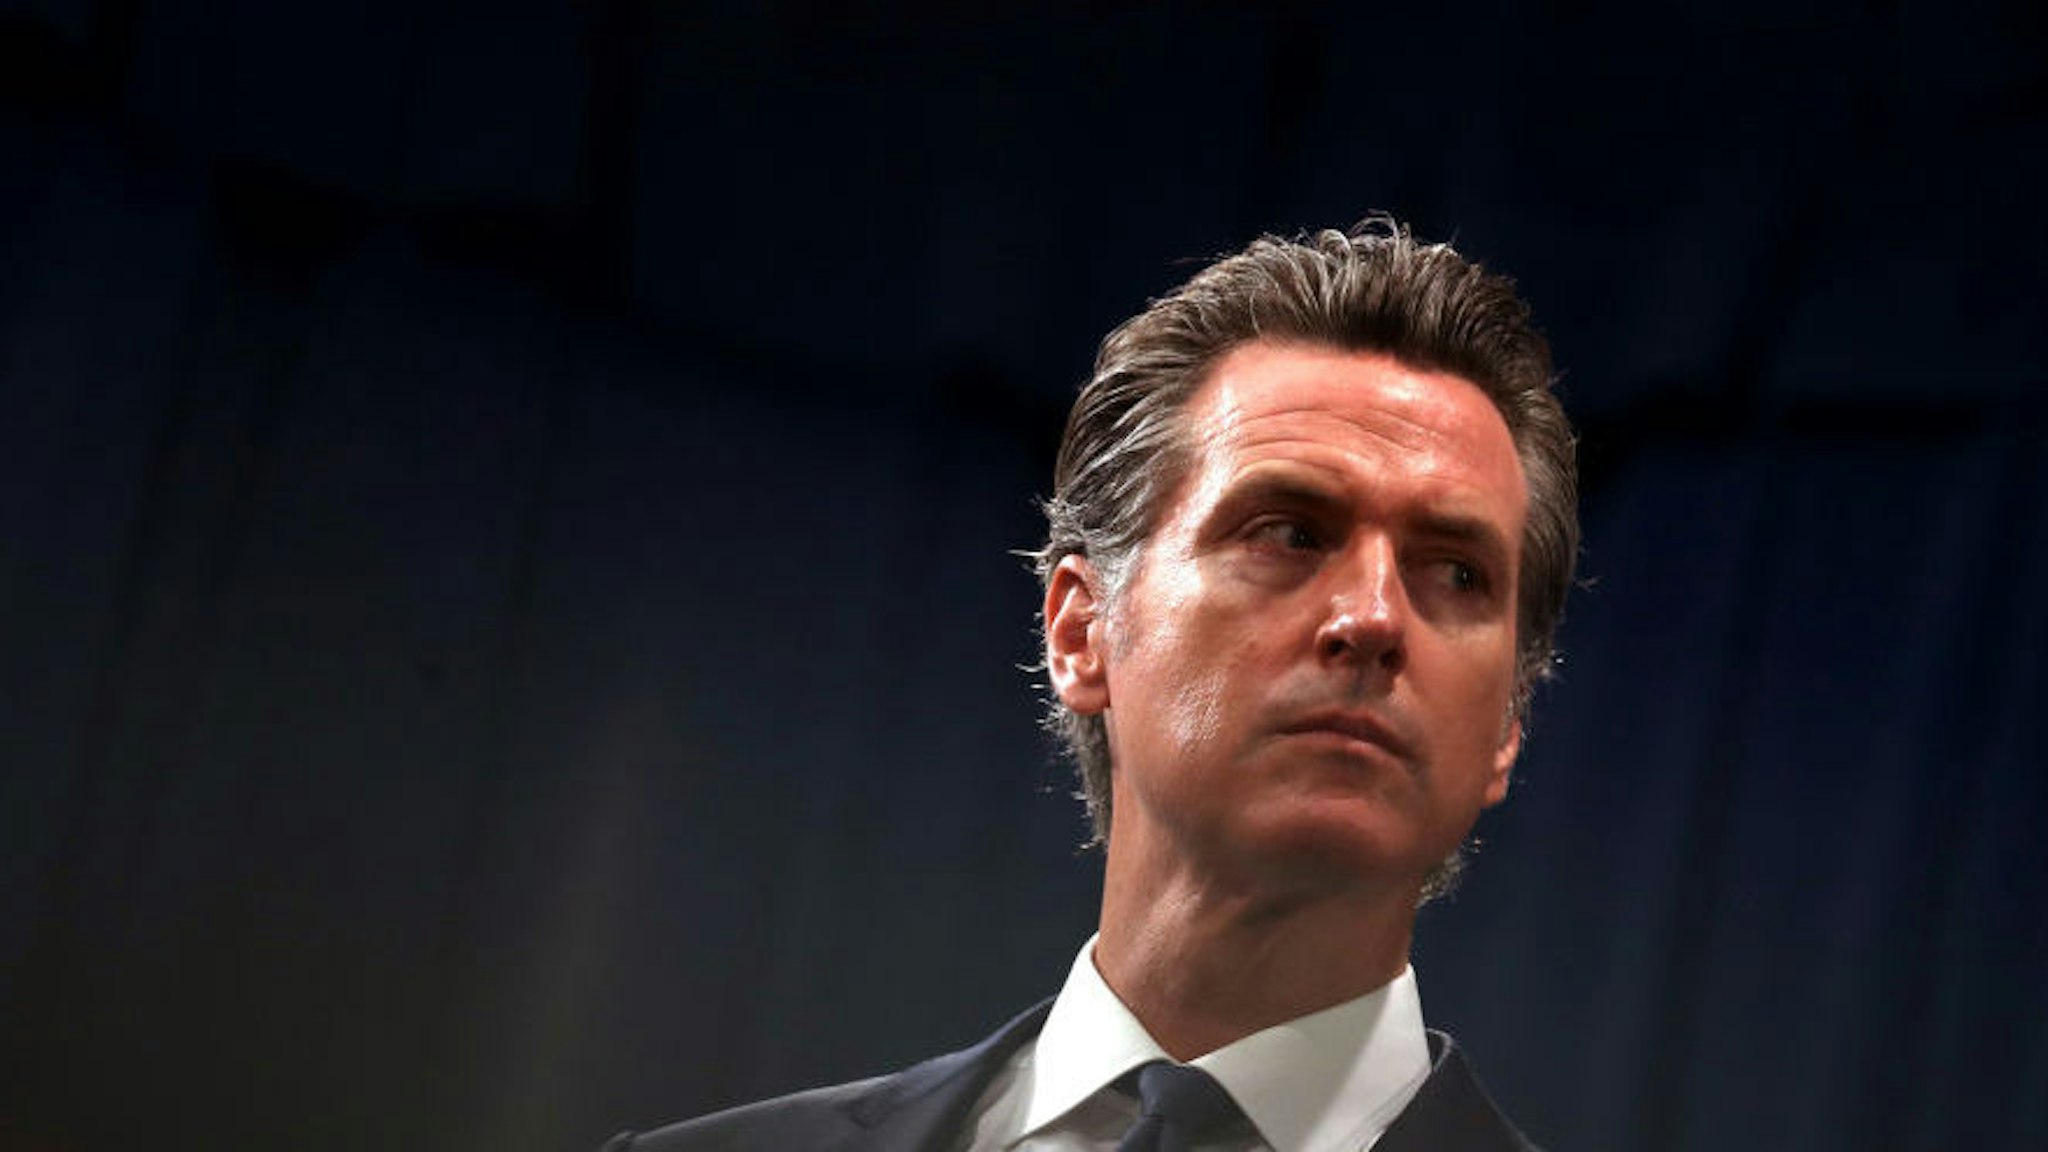 SACRAMENTO, CALIFORNIA - AUGUST 16: California Gov. Gavin Newsom looks on during a news conference with California attorney General Xavier Becerra at the California State Capitol on August 16, 2019 in Sacramento, California. California attorney genera Xavier Becerra and California Gov. Gavin Newsom announced that the State of California is suing the Trump administration challenging the legality of a new "public charge" rule that would make it difficult for immigrants to obtain green cards who receive public assistance like food stamps and Medicaid.